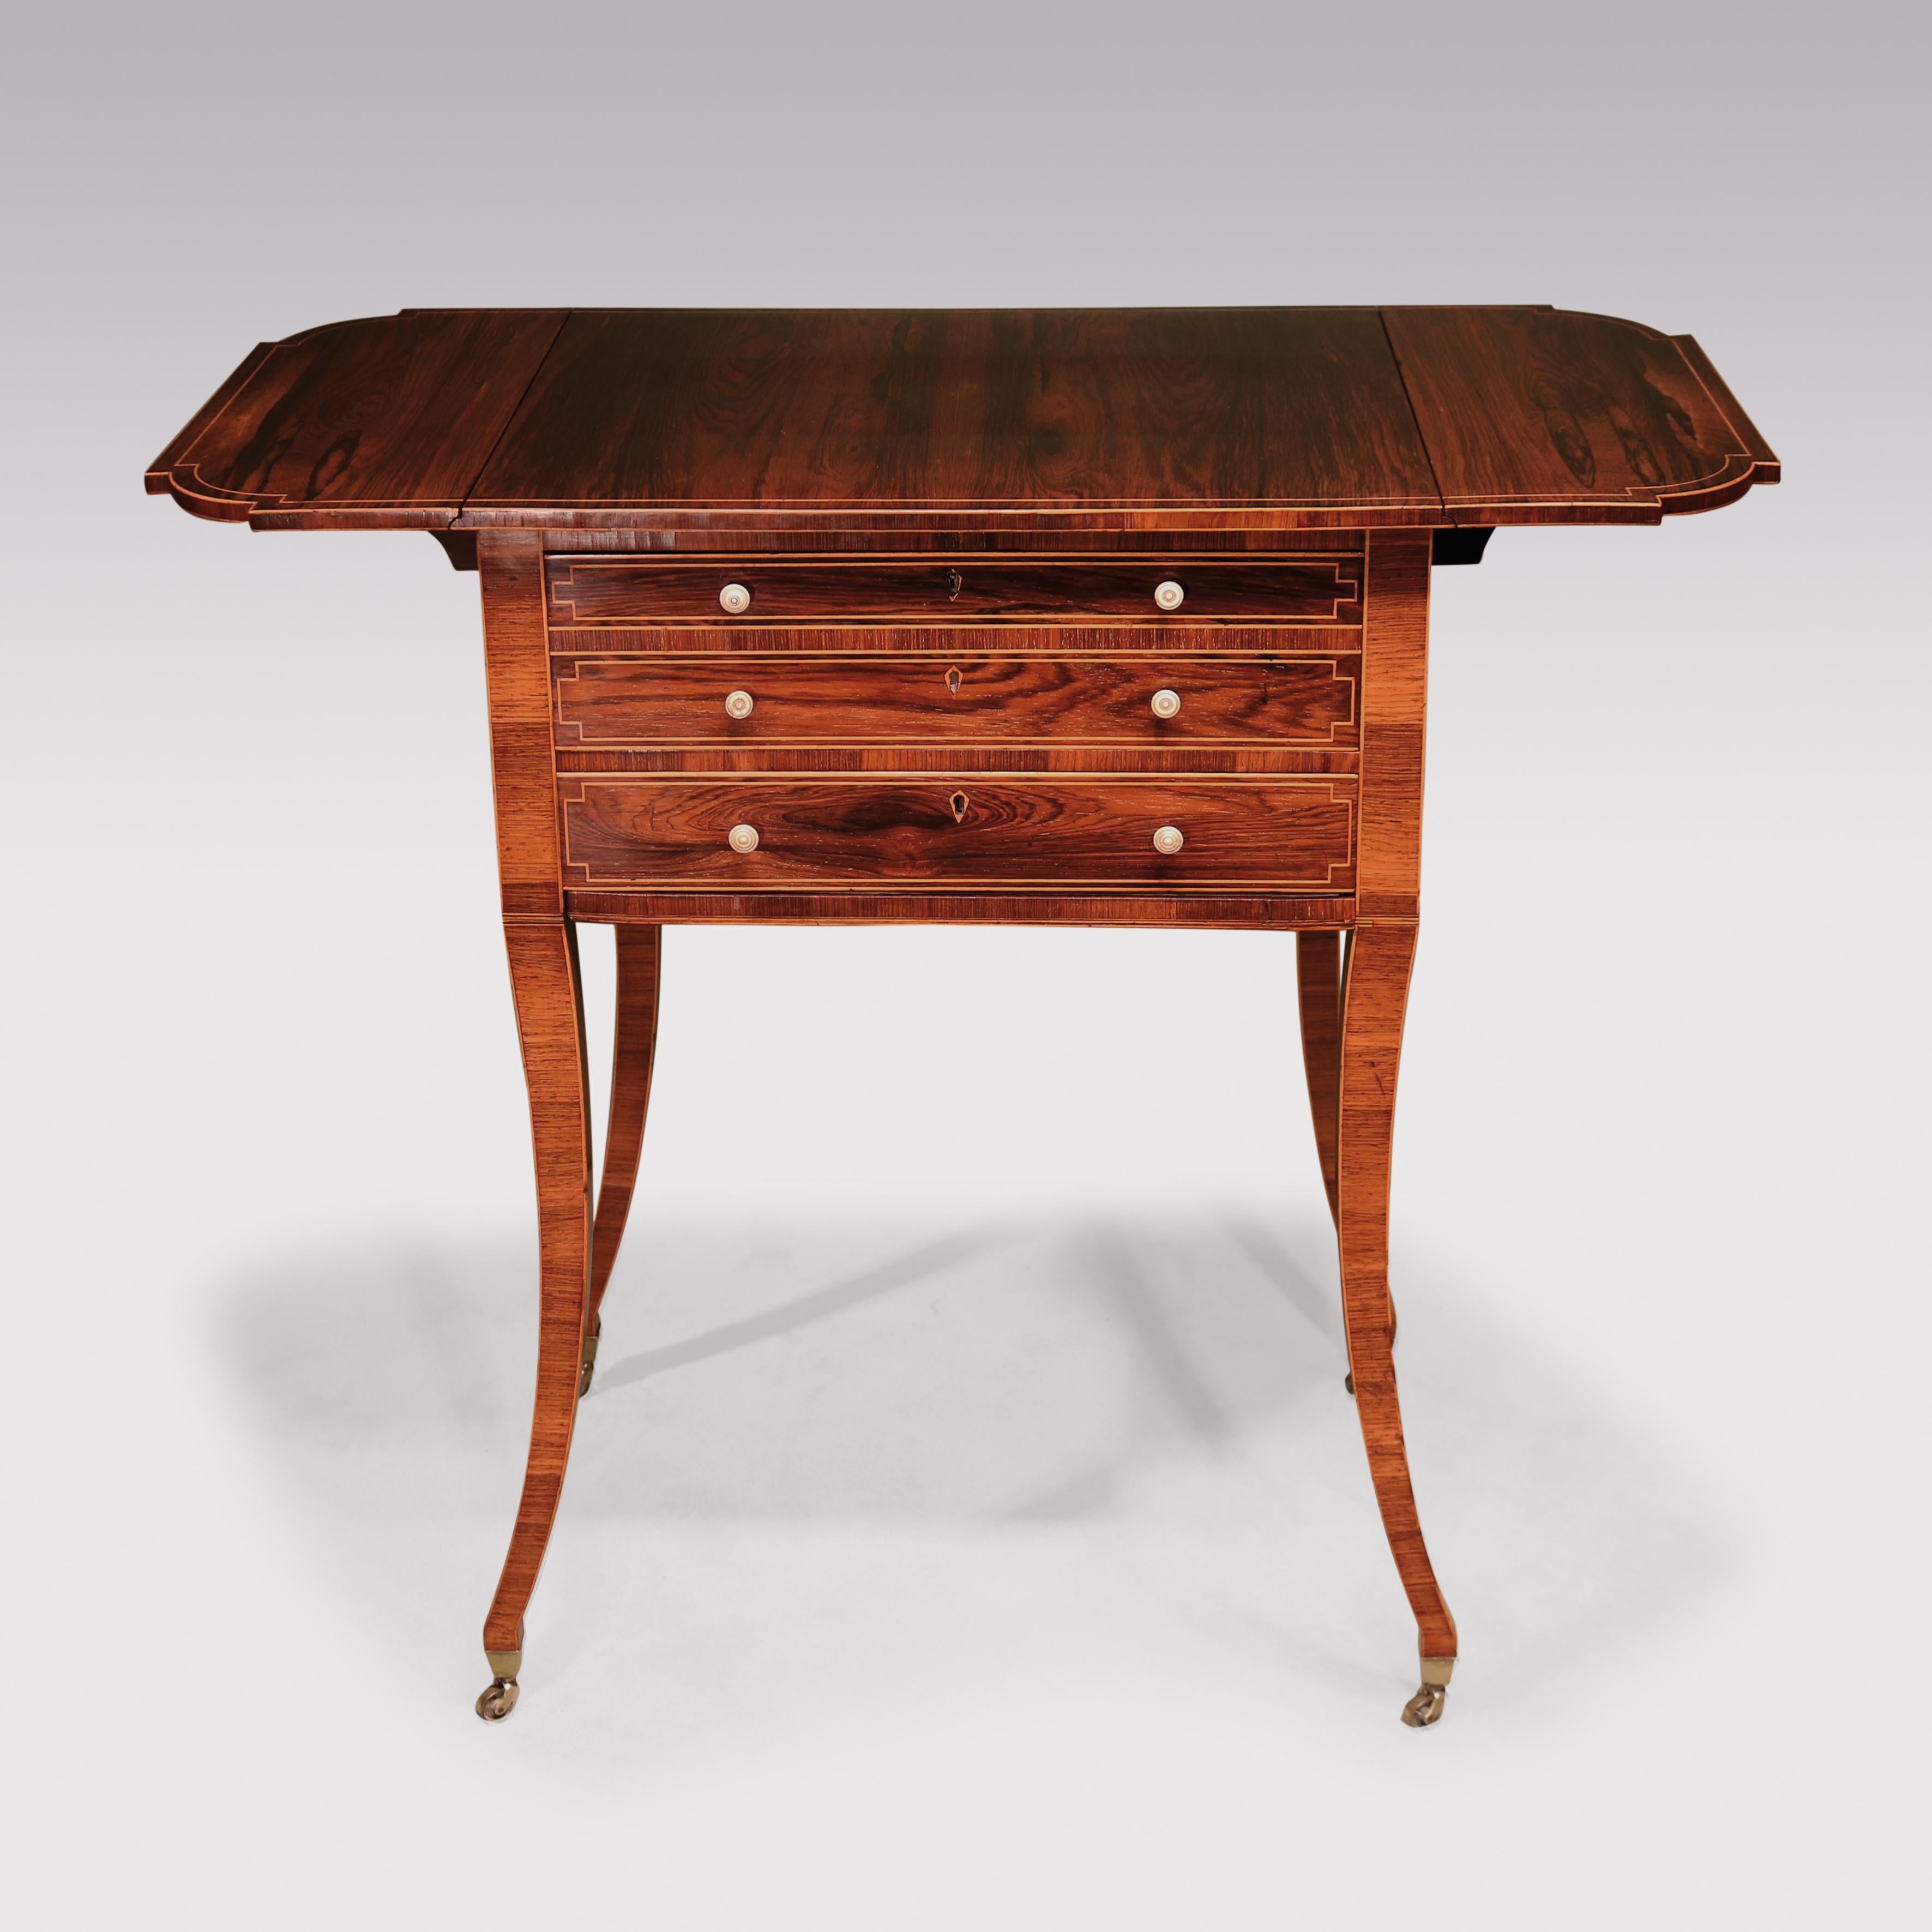 English Early 19th Century Regency Period Rosewood Occasional Table, Boxwood Strung